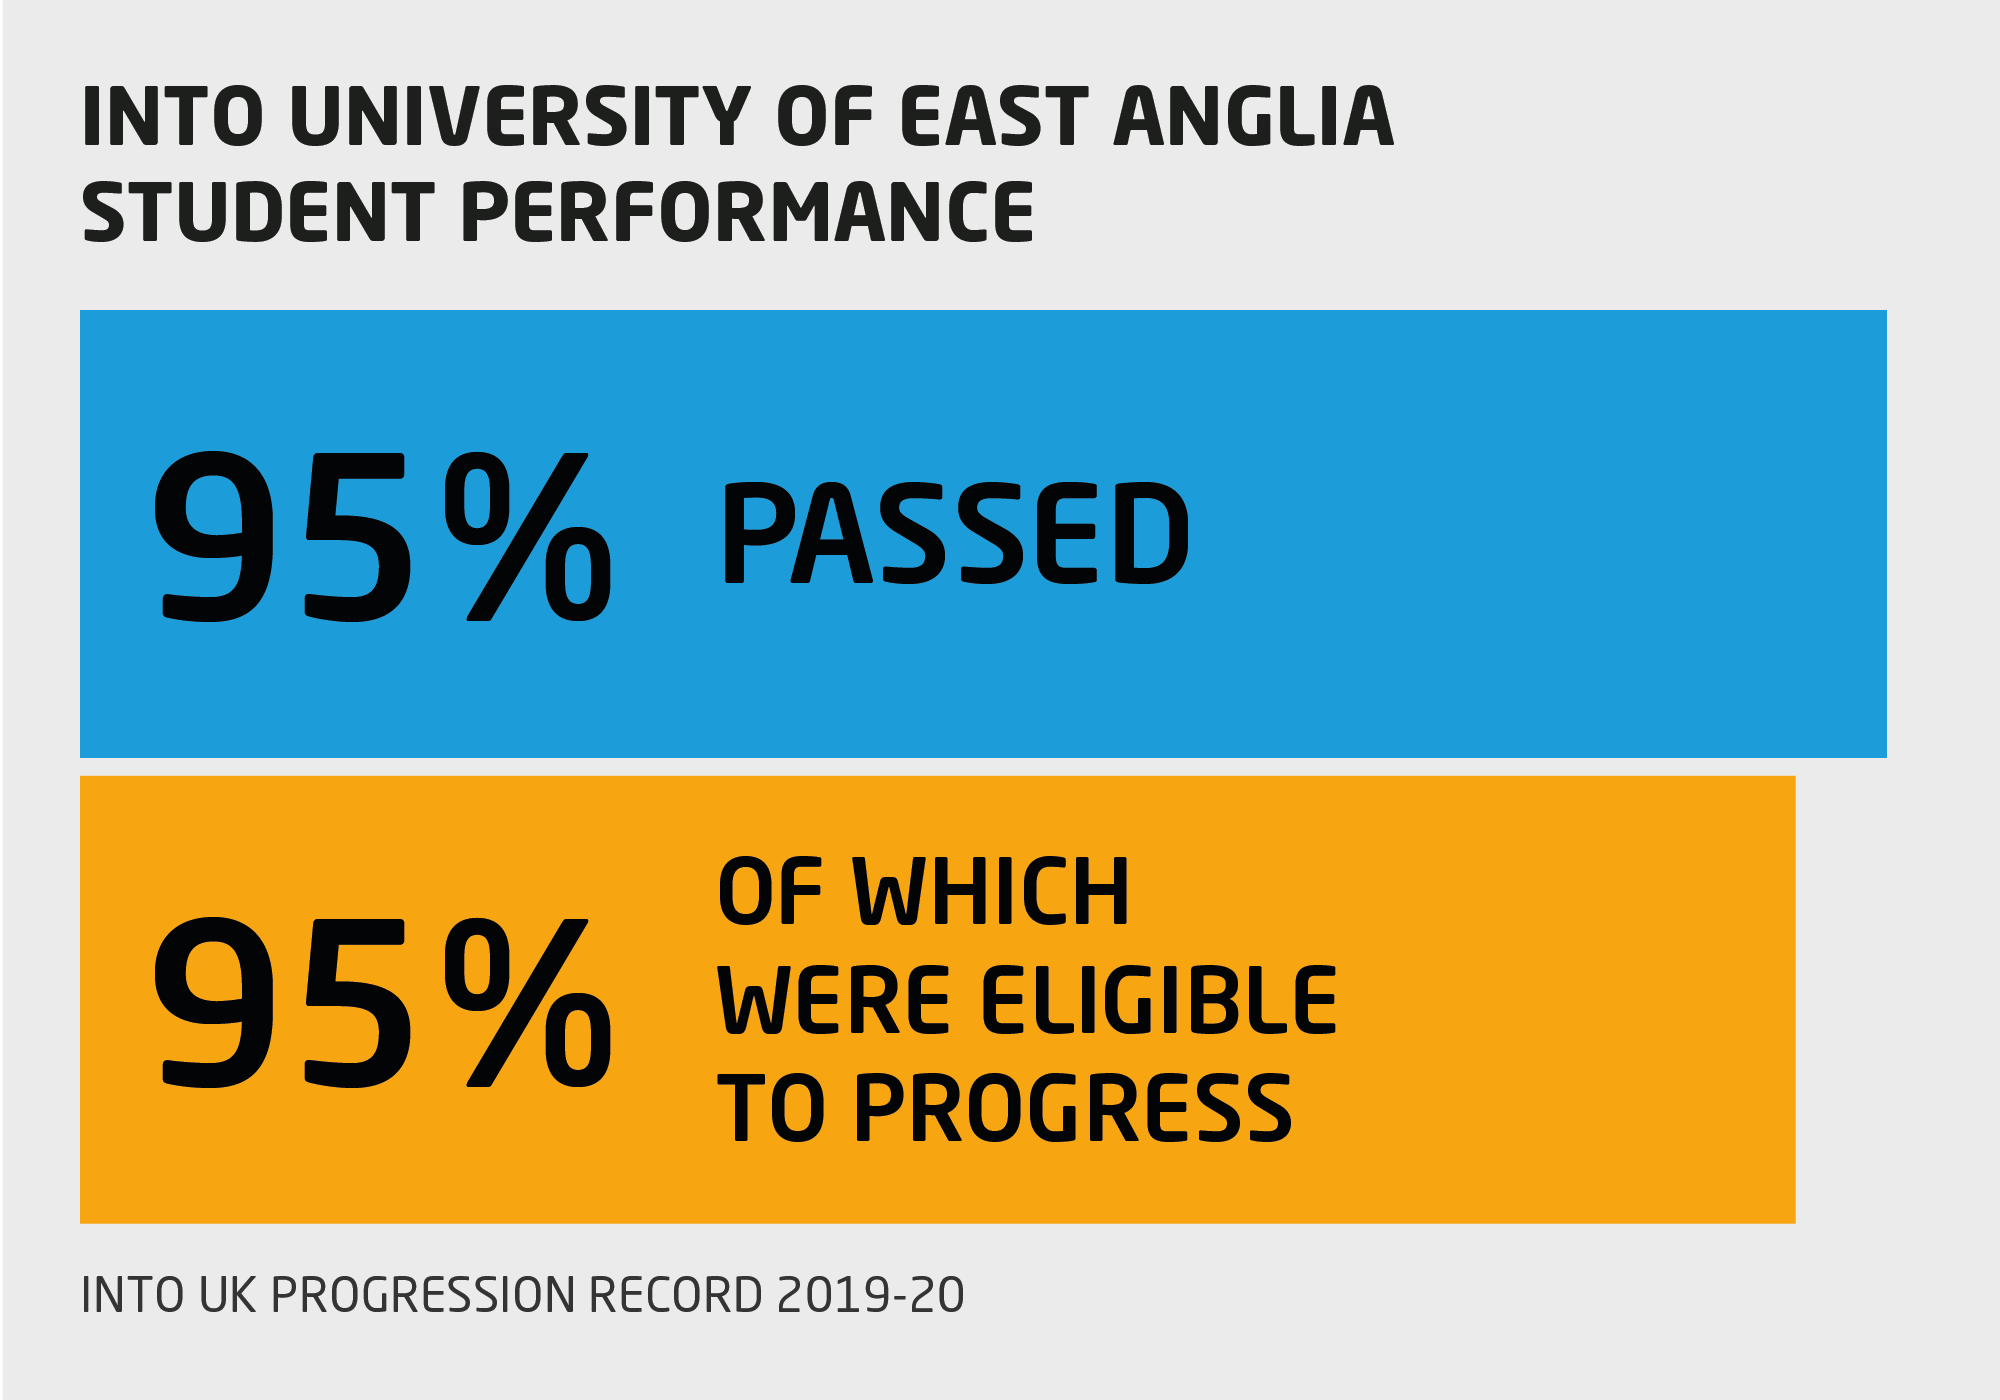 Infographic showing INTO University of East Anglia student performance, with 95% passing INTO UEA Pathway programs, and 95% of those eligible to progress to UEA degree programs.